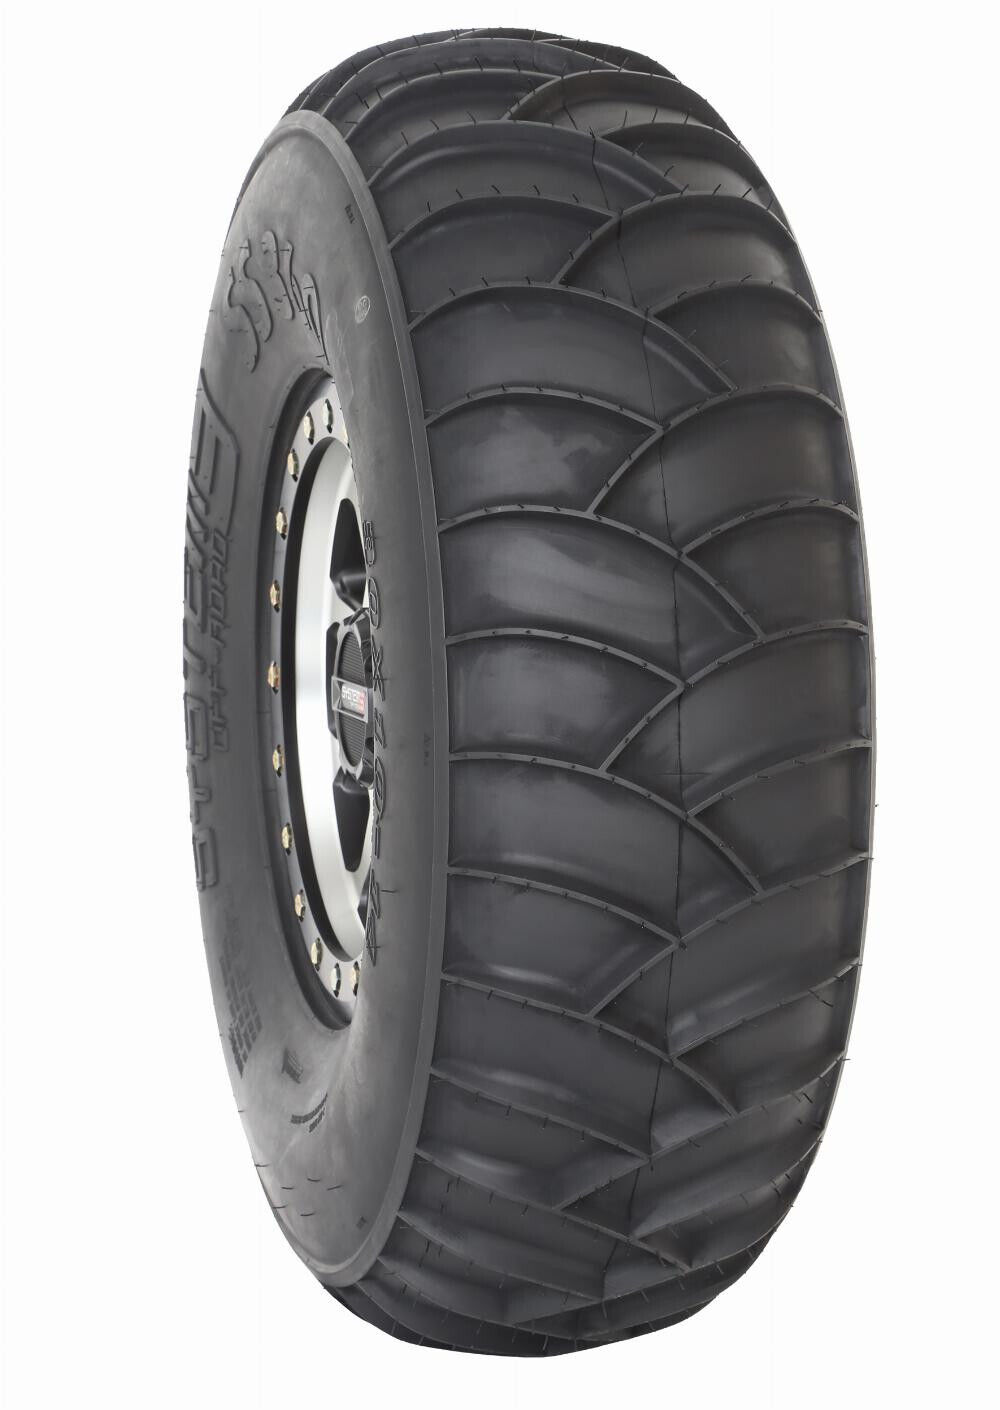 System 3 S3-0690 Tire SS360 33x10-15